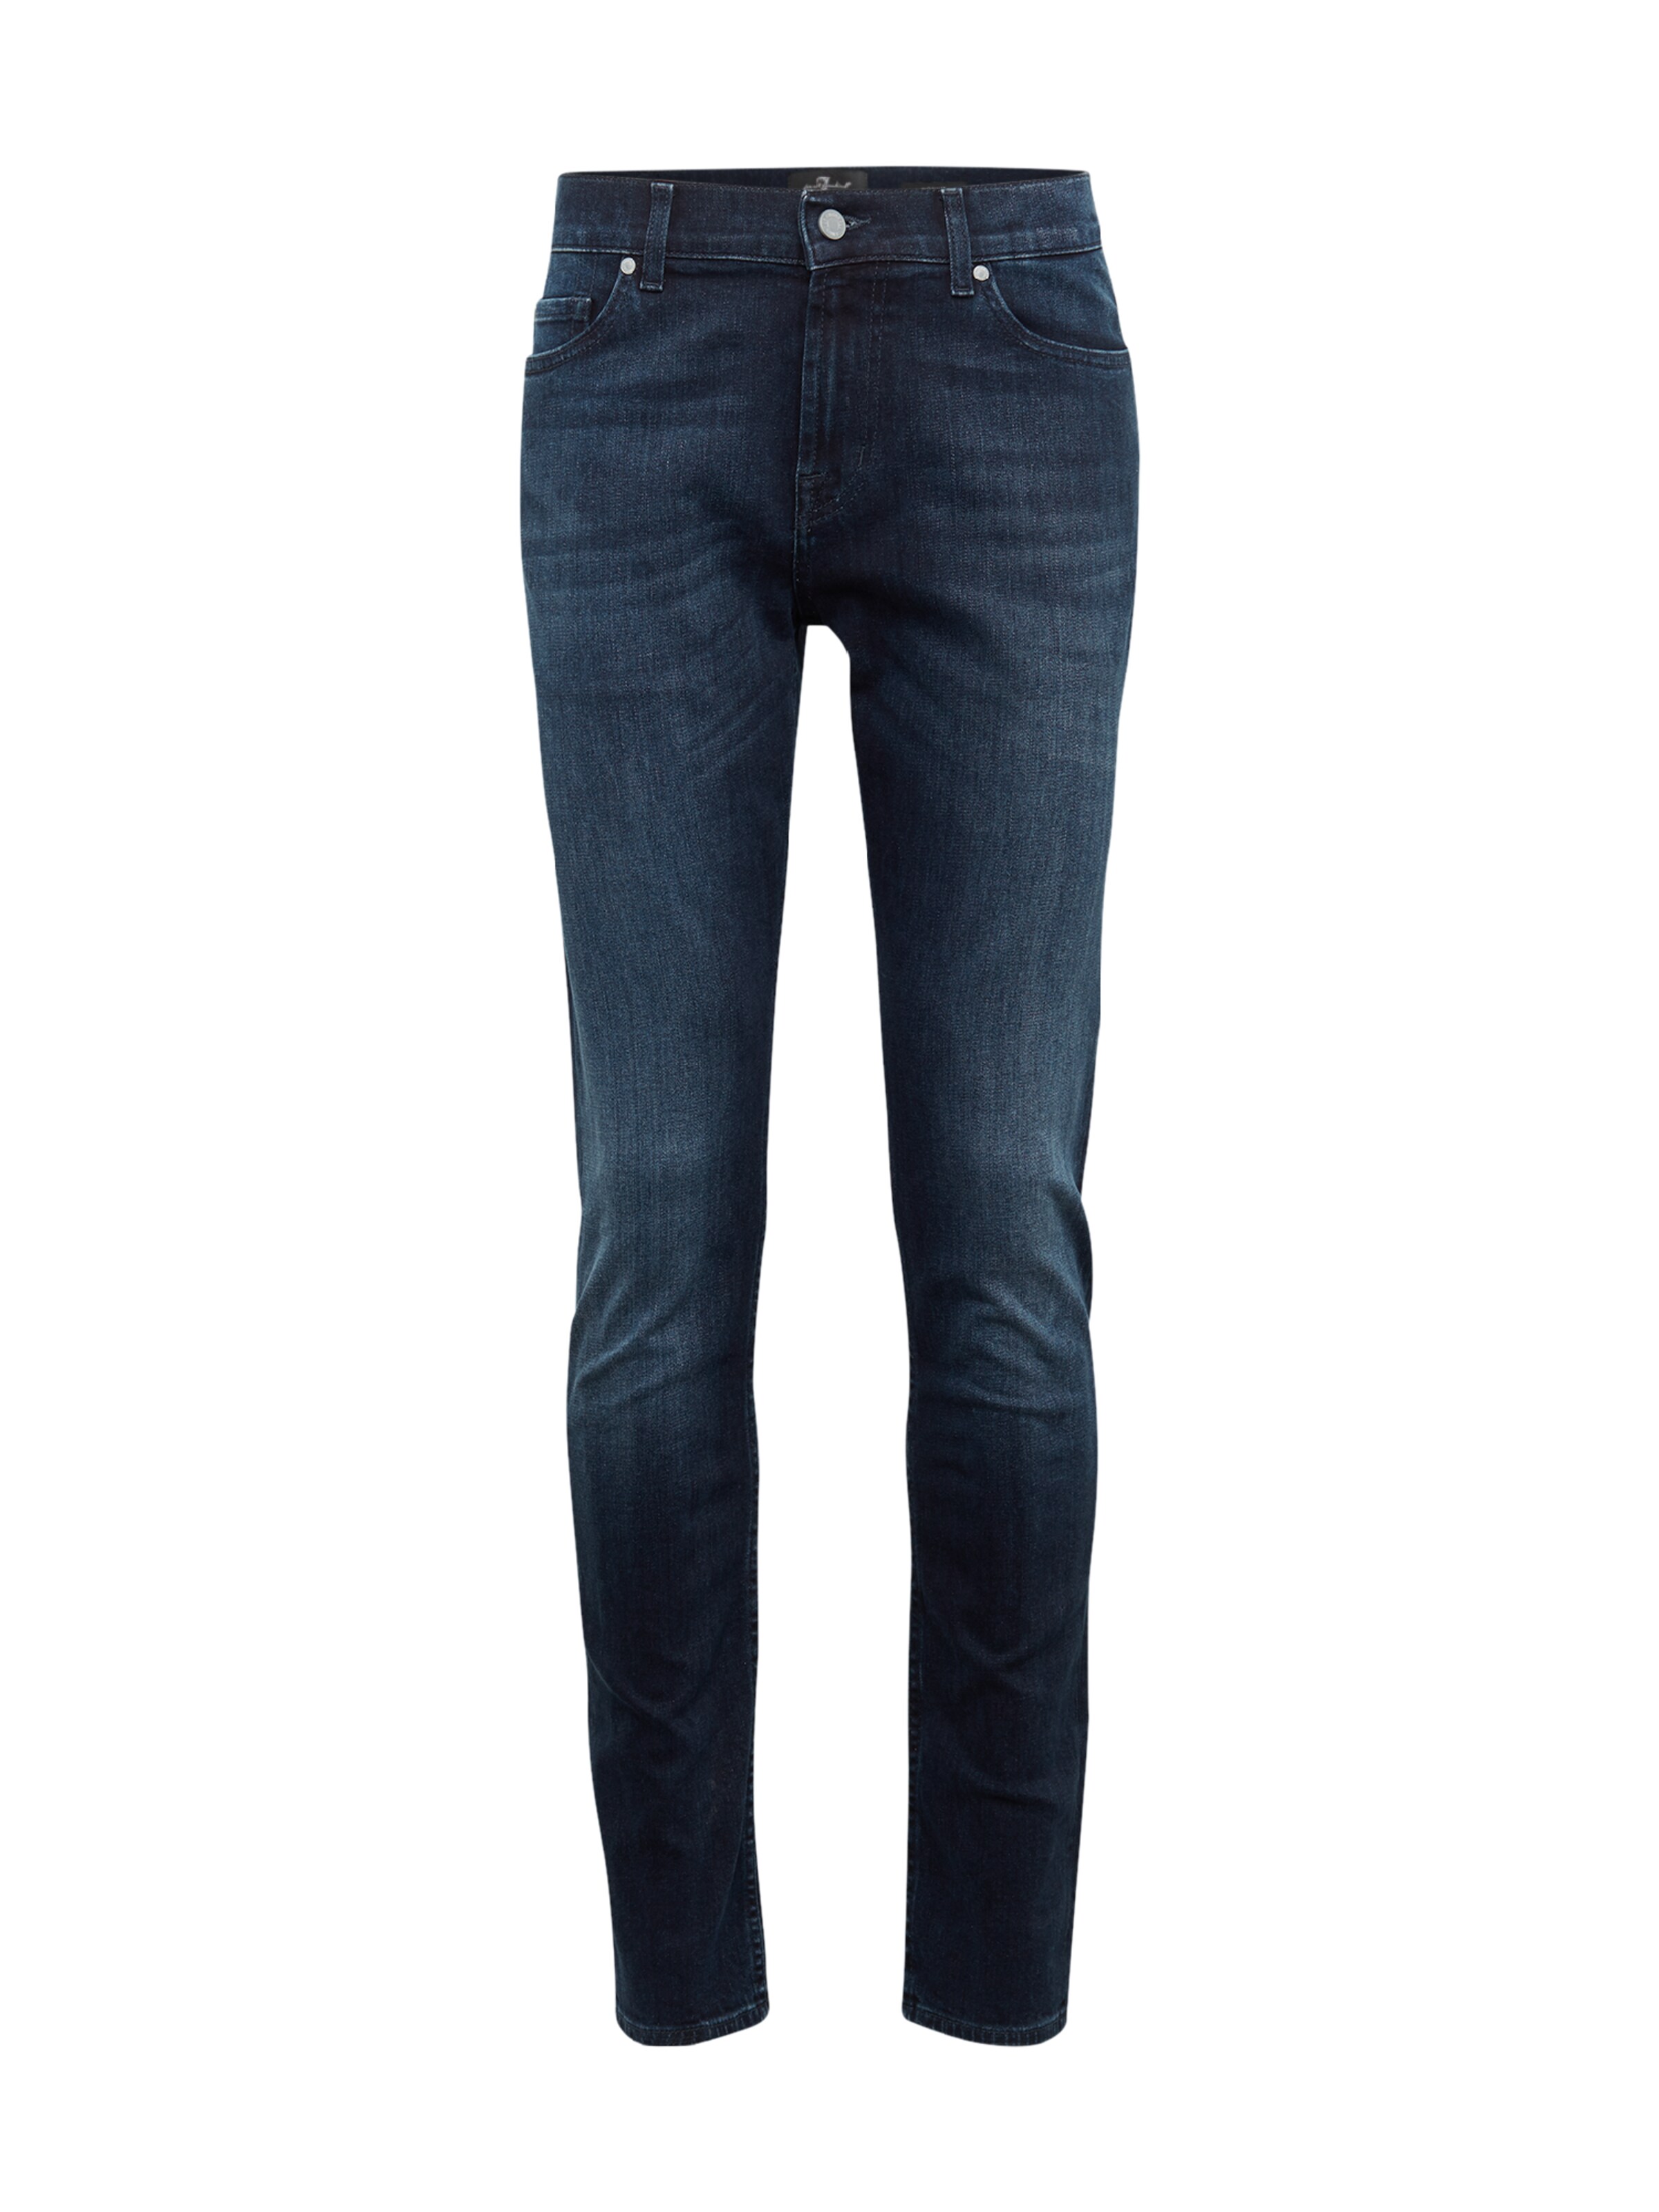 PiHes Jeans 7 for all mankind Jeans RONNIE LUXE PERFORMANCE in Blu 